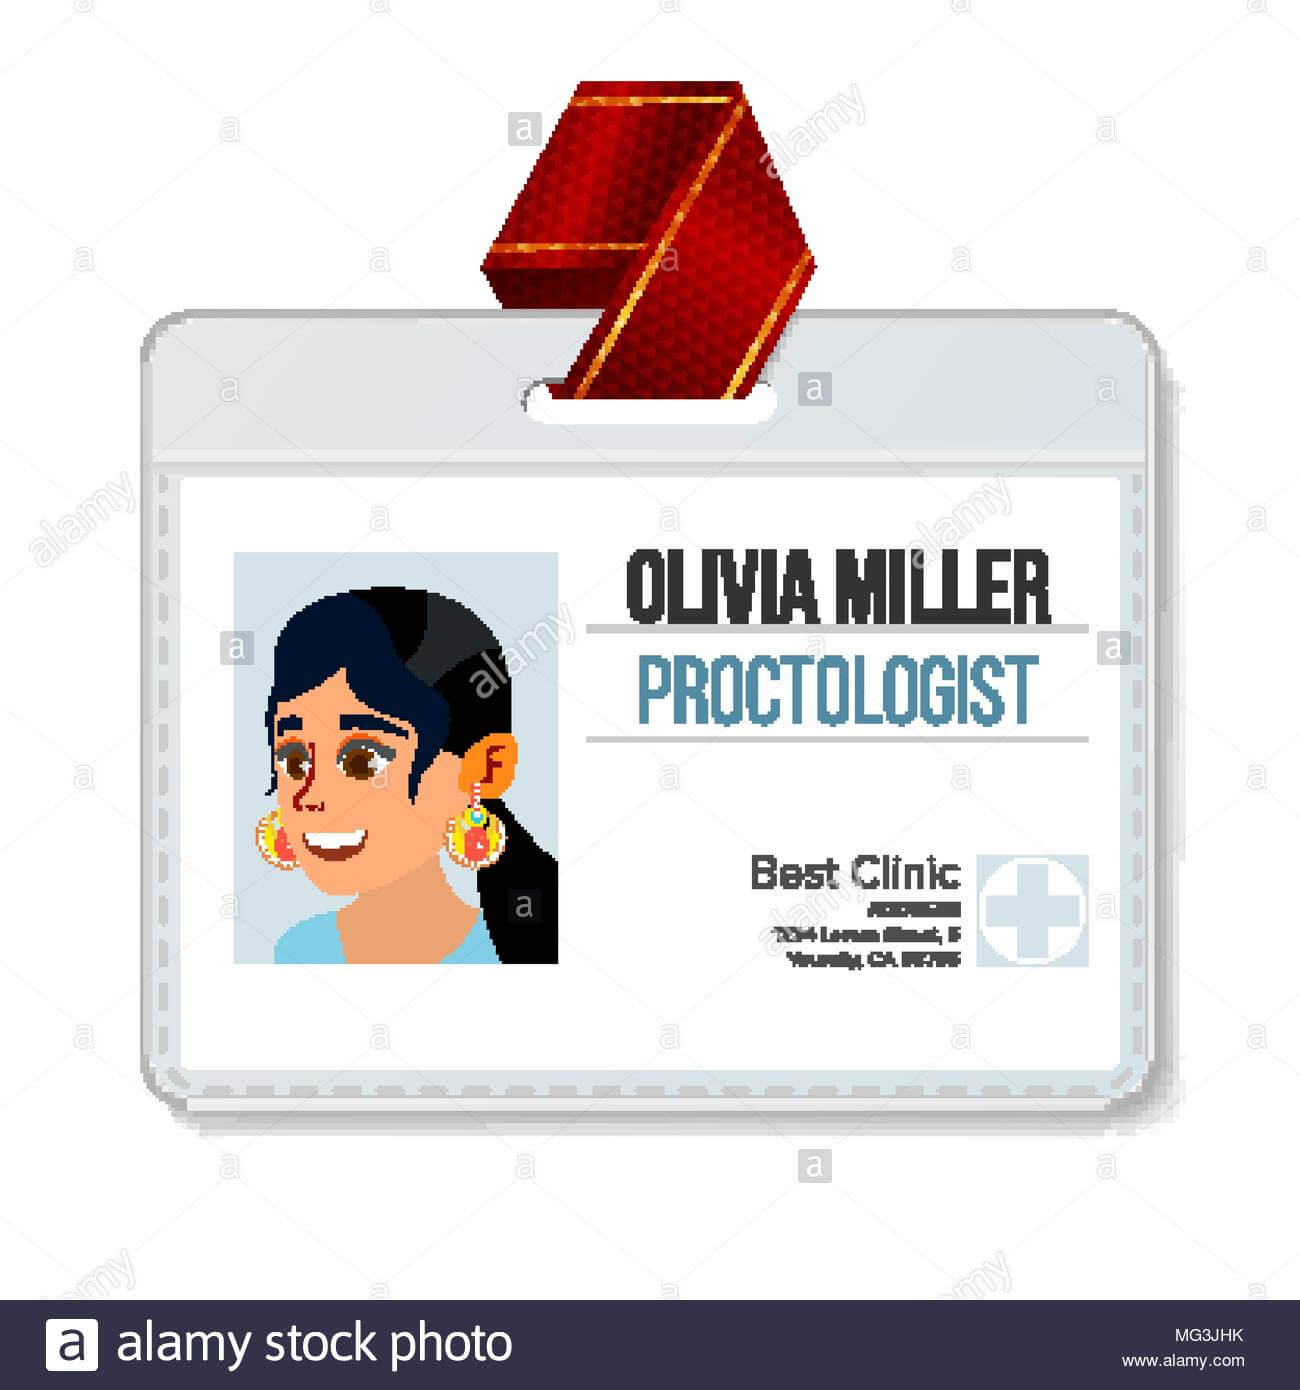 Proctologist Identification Badge Vector. Woman. Id Card For Hospital Id Card Template